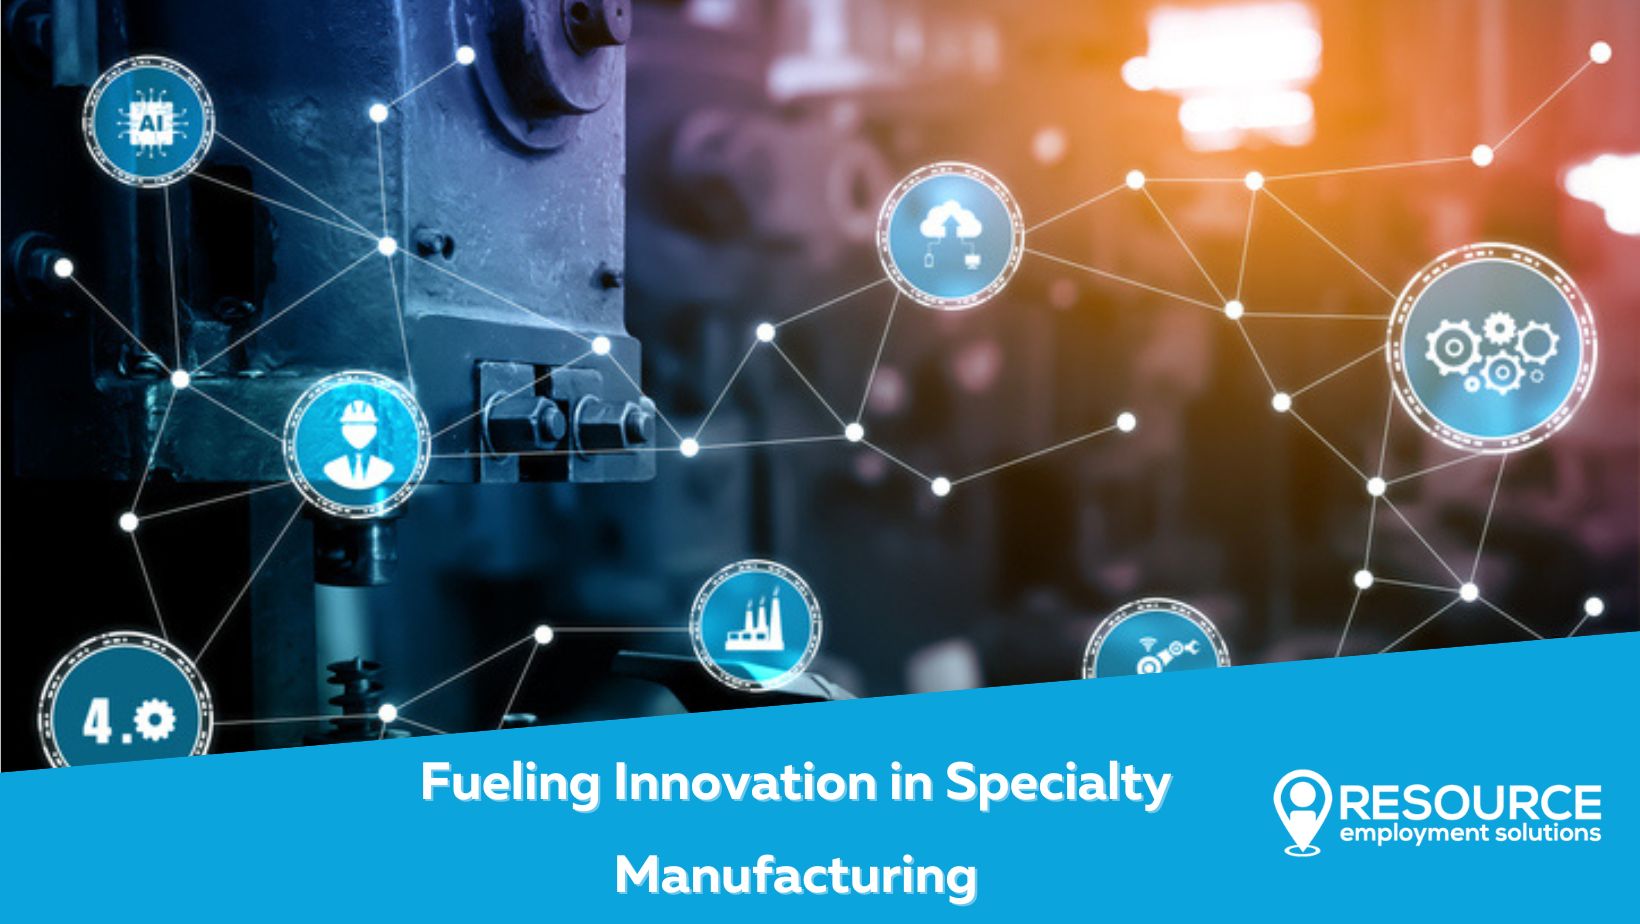 Fueling Innovation in Specialty Manufacturing with Resource Employment Solutions